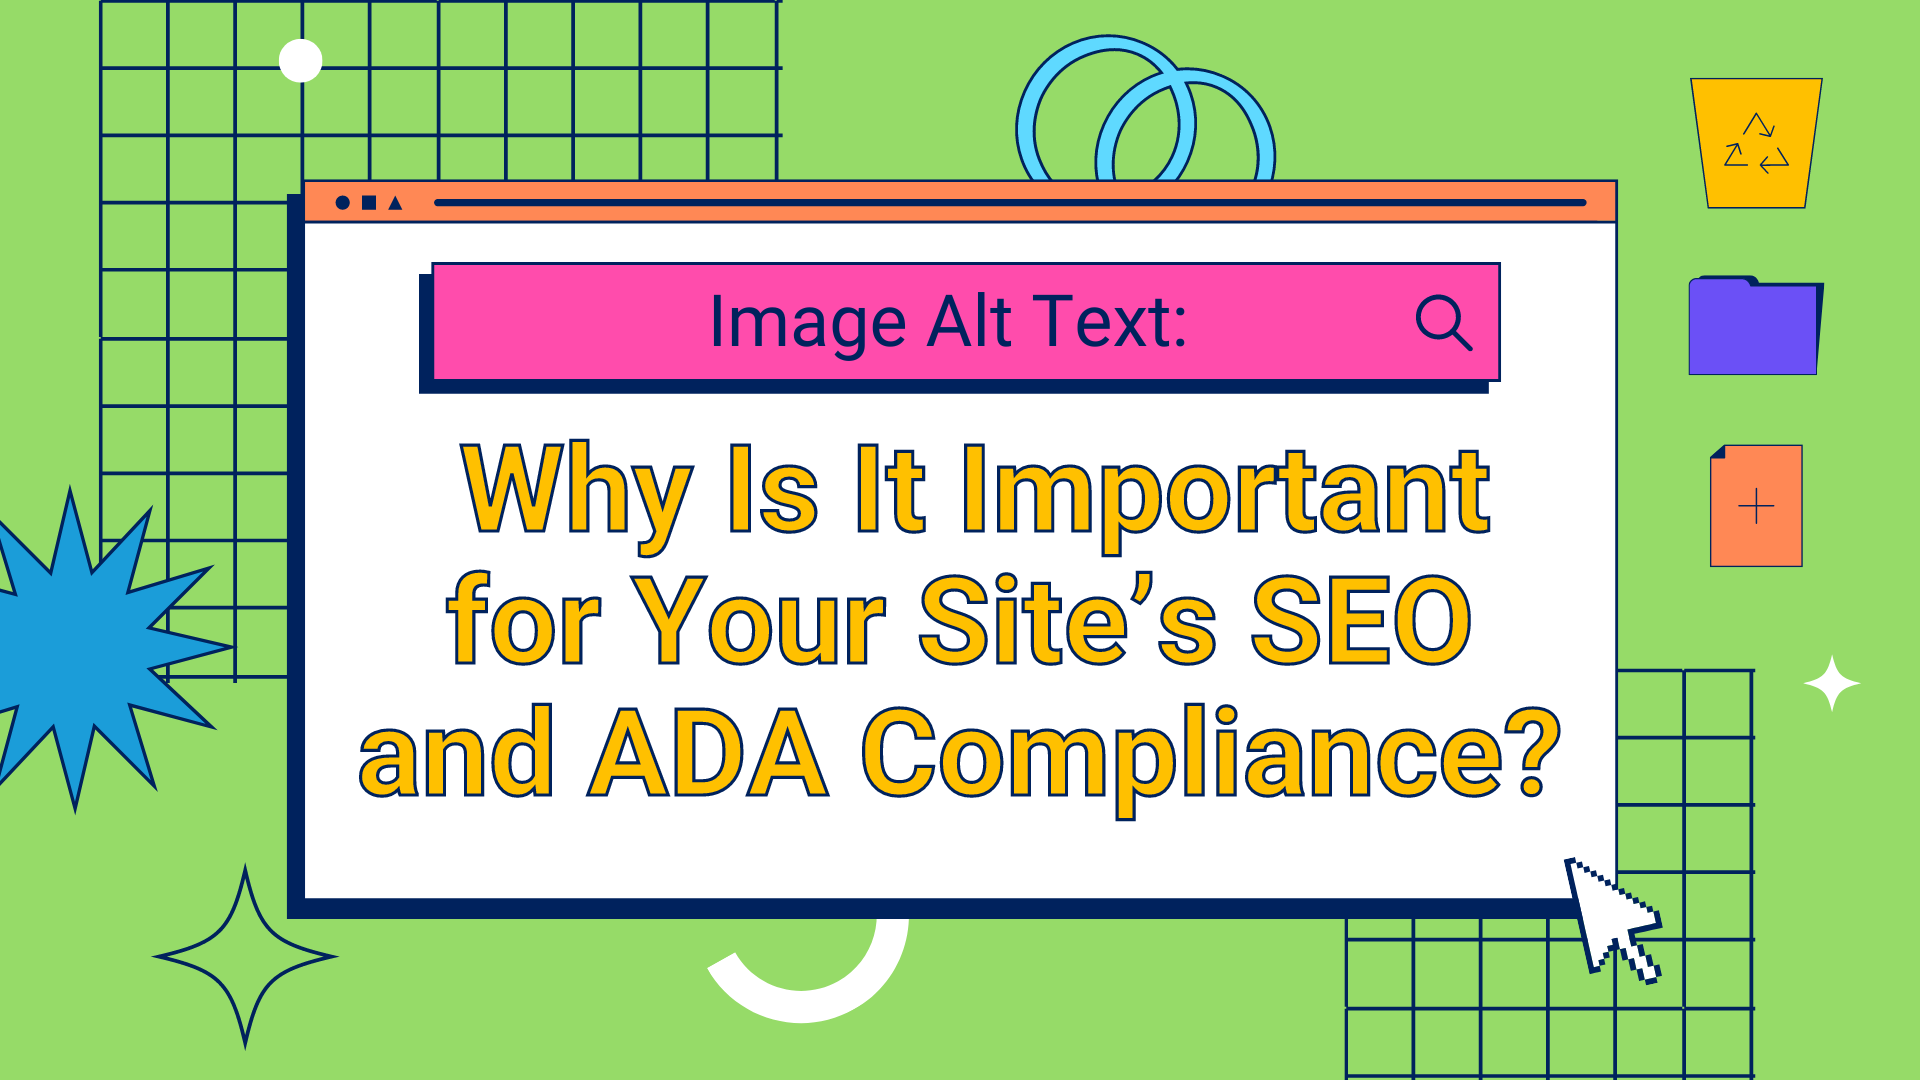 Image Alt Text: Why Is It Important for Your Site’s SEO and ADA Compliance?